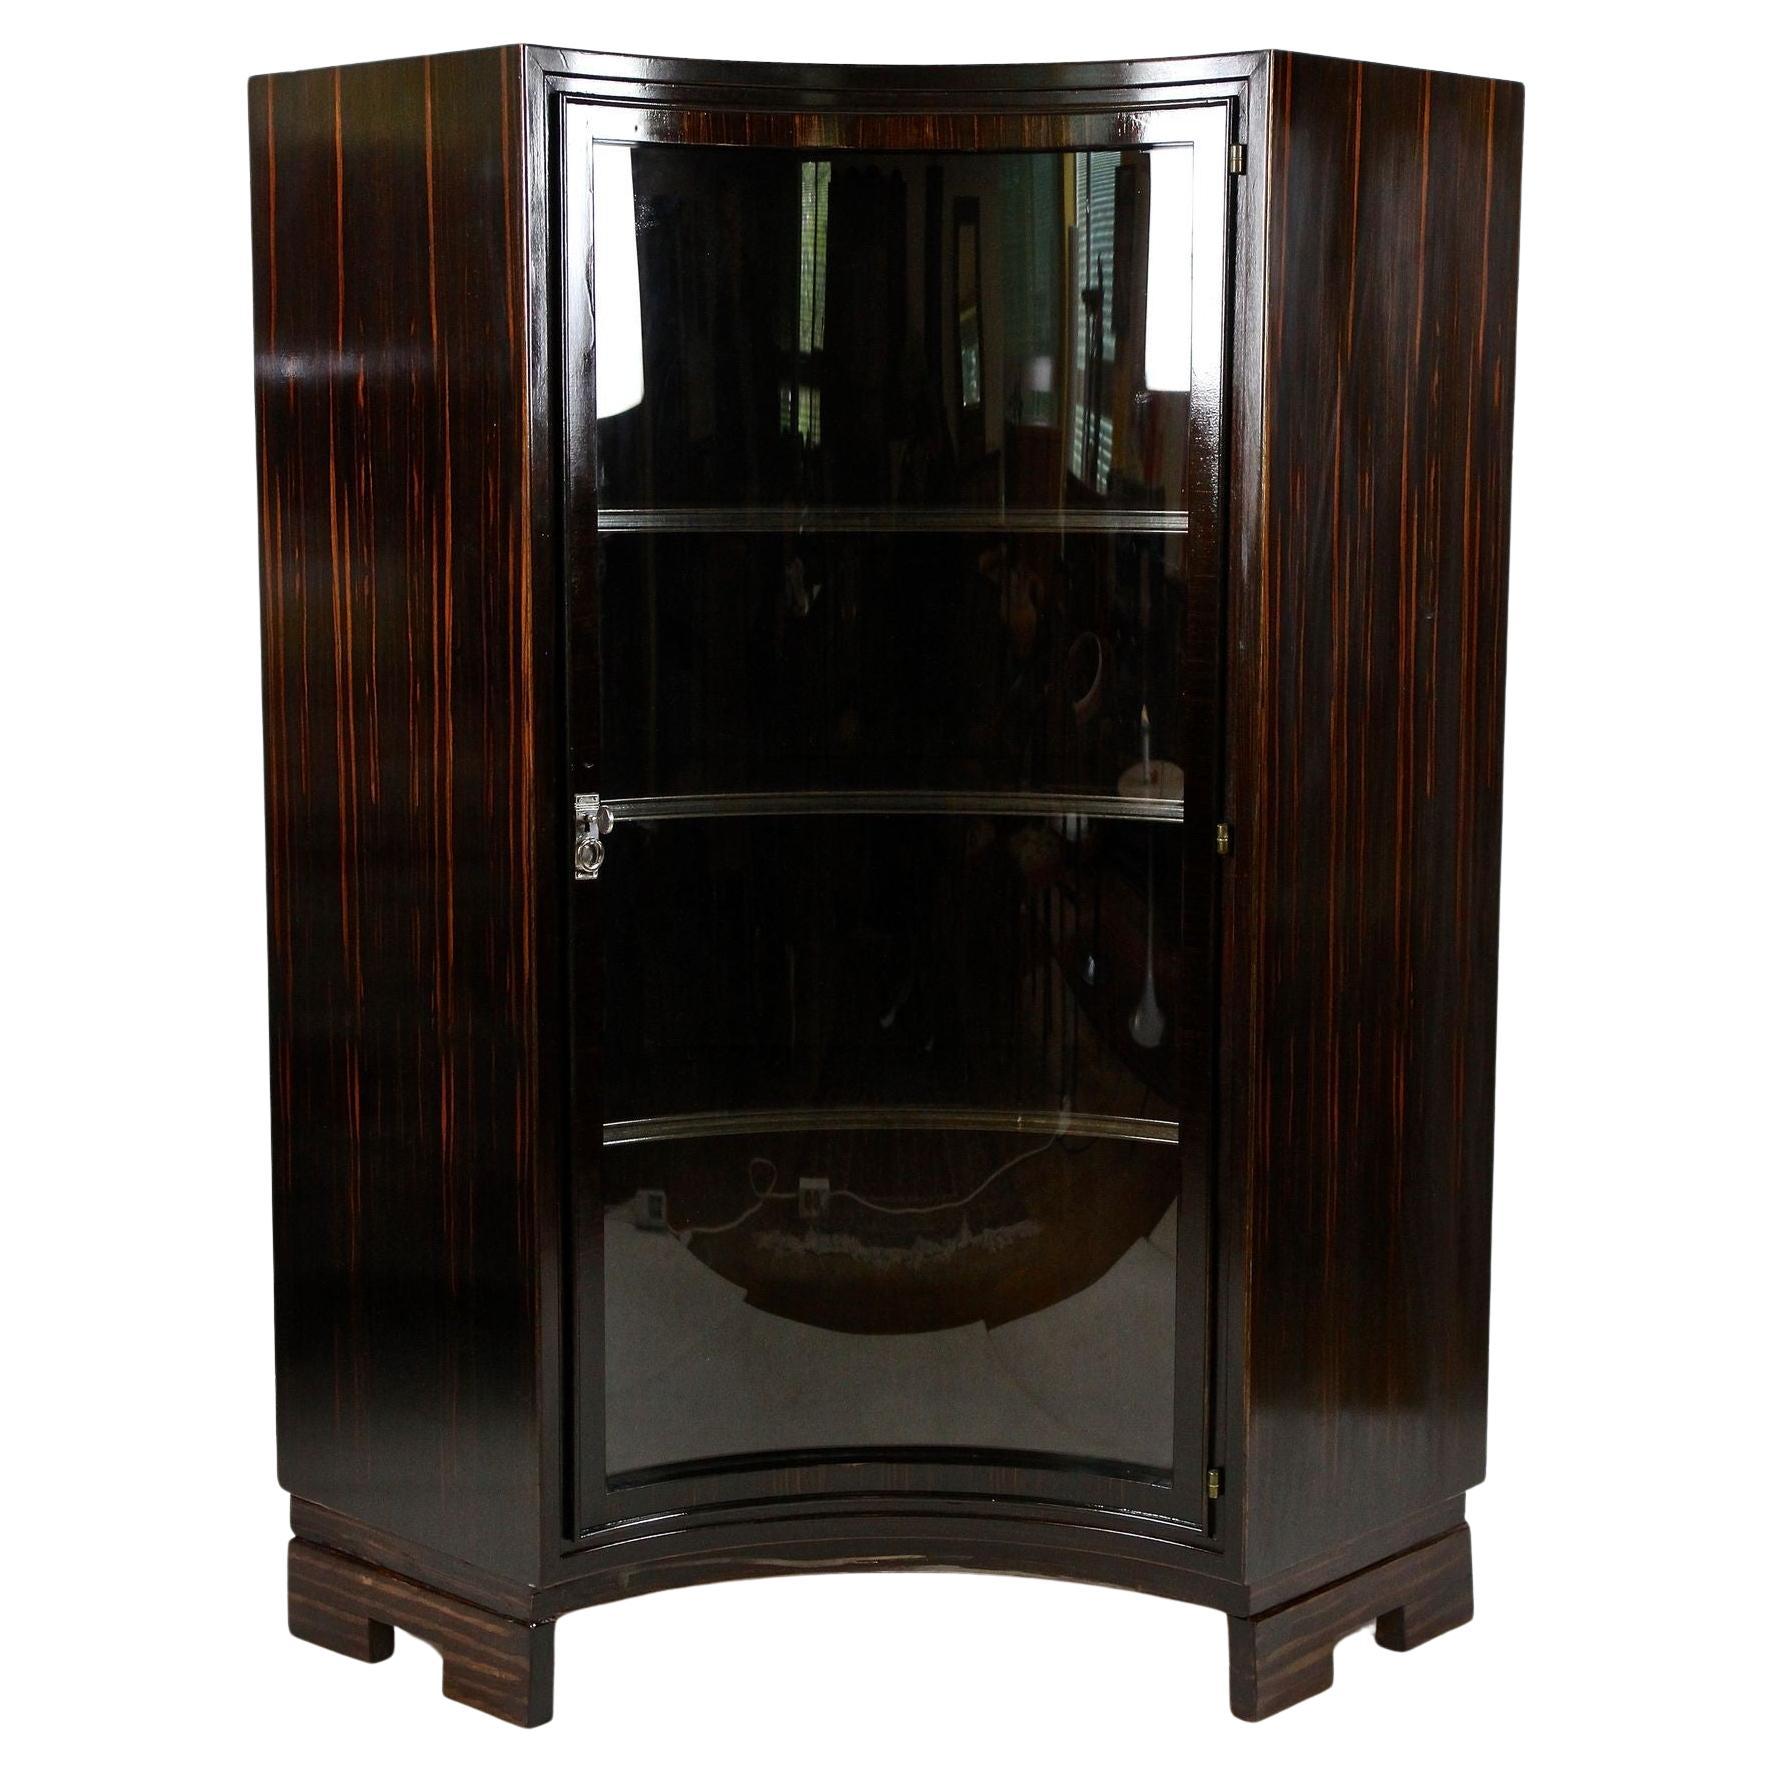 Art Deco Palisander Display Cabinet with Curved Glass Panel, France circa 1930